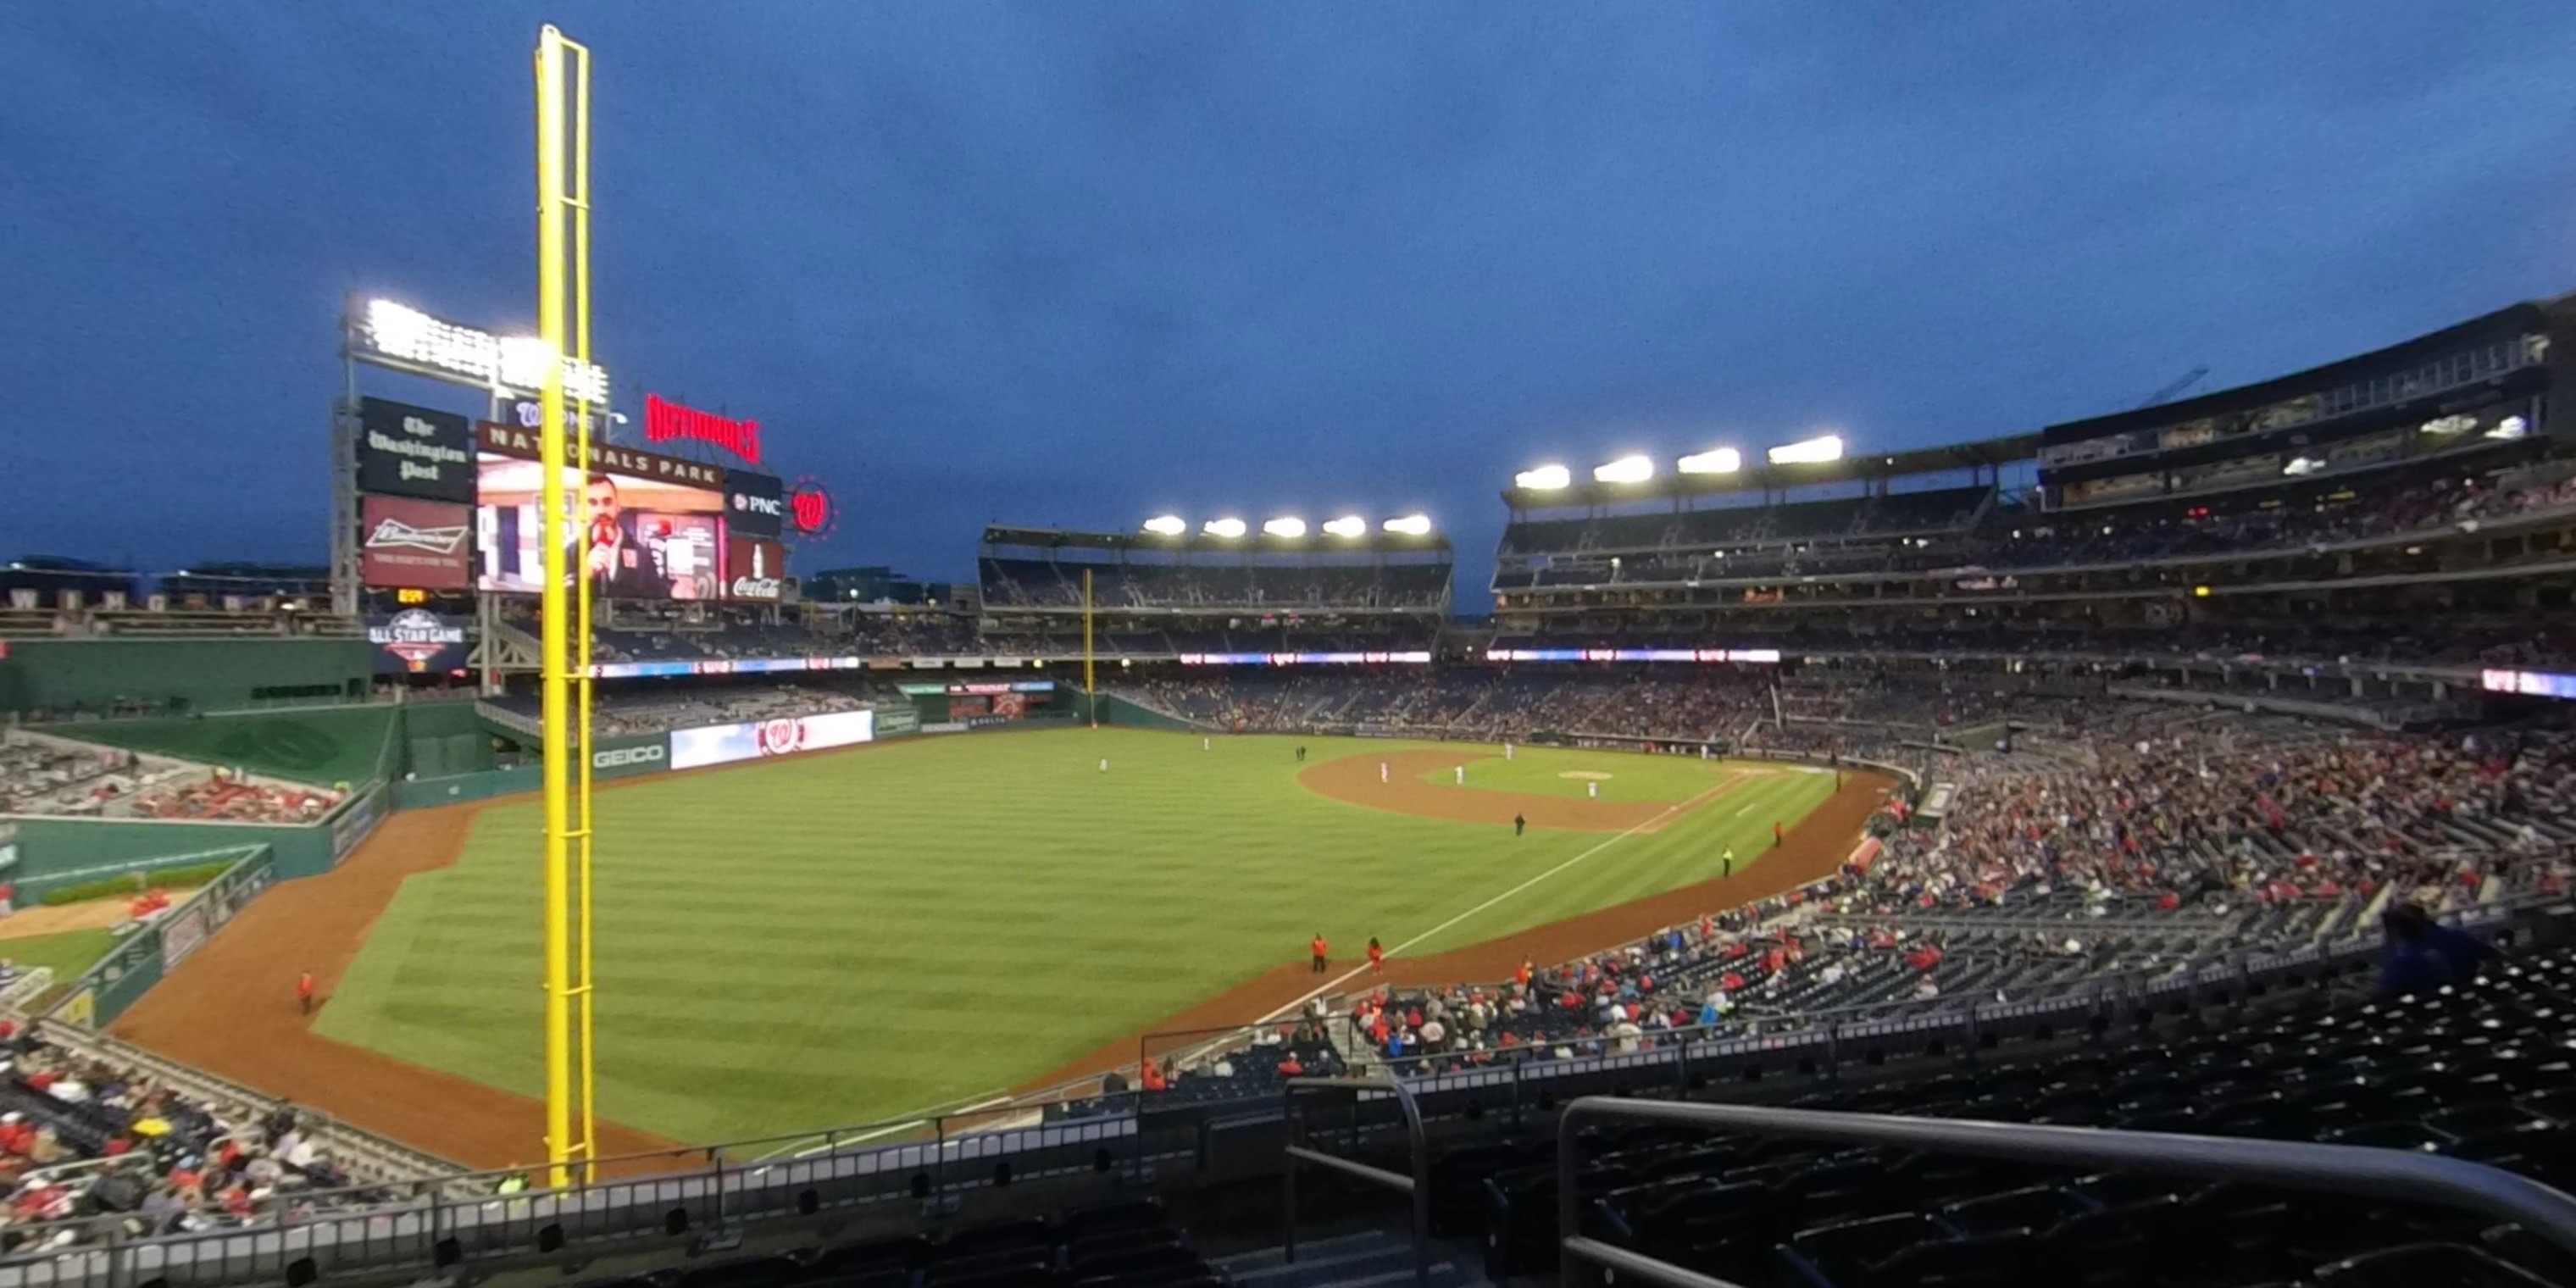 section 201 panoramic seat view  for baseball - nationals park